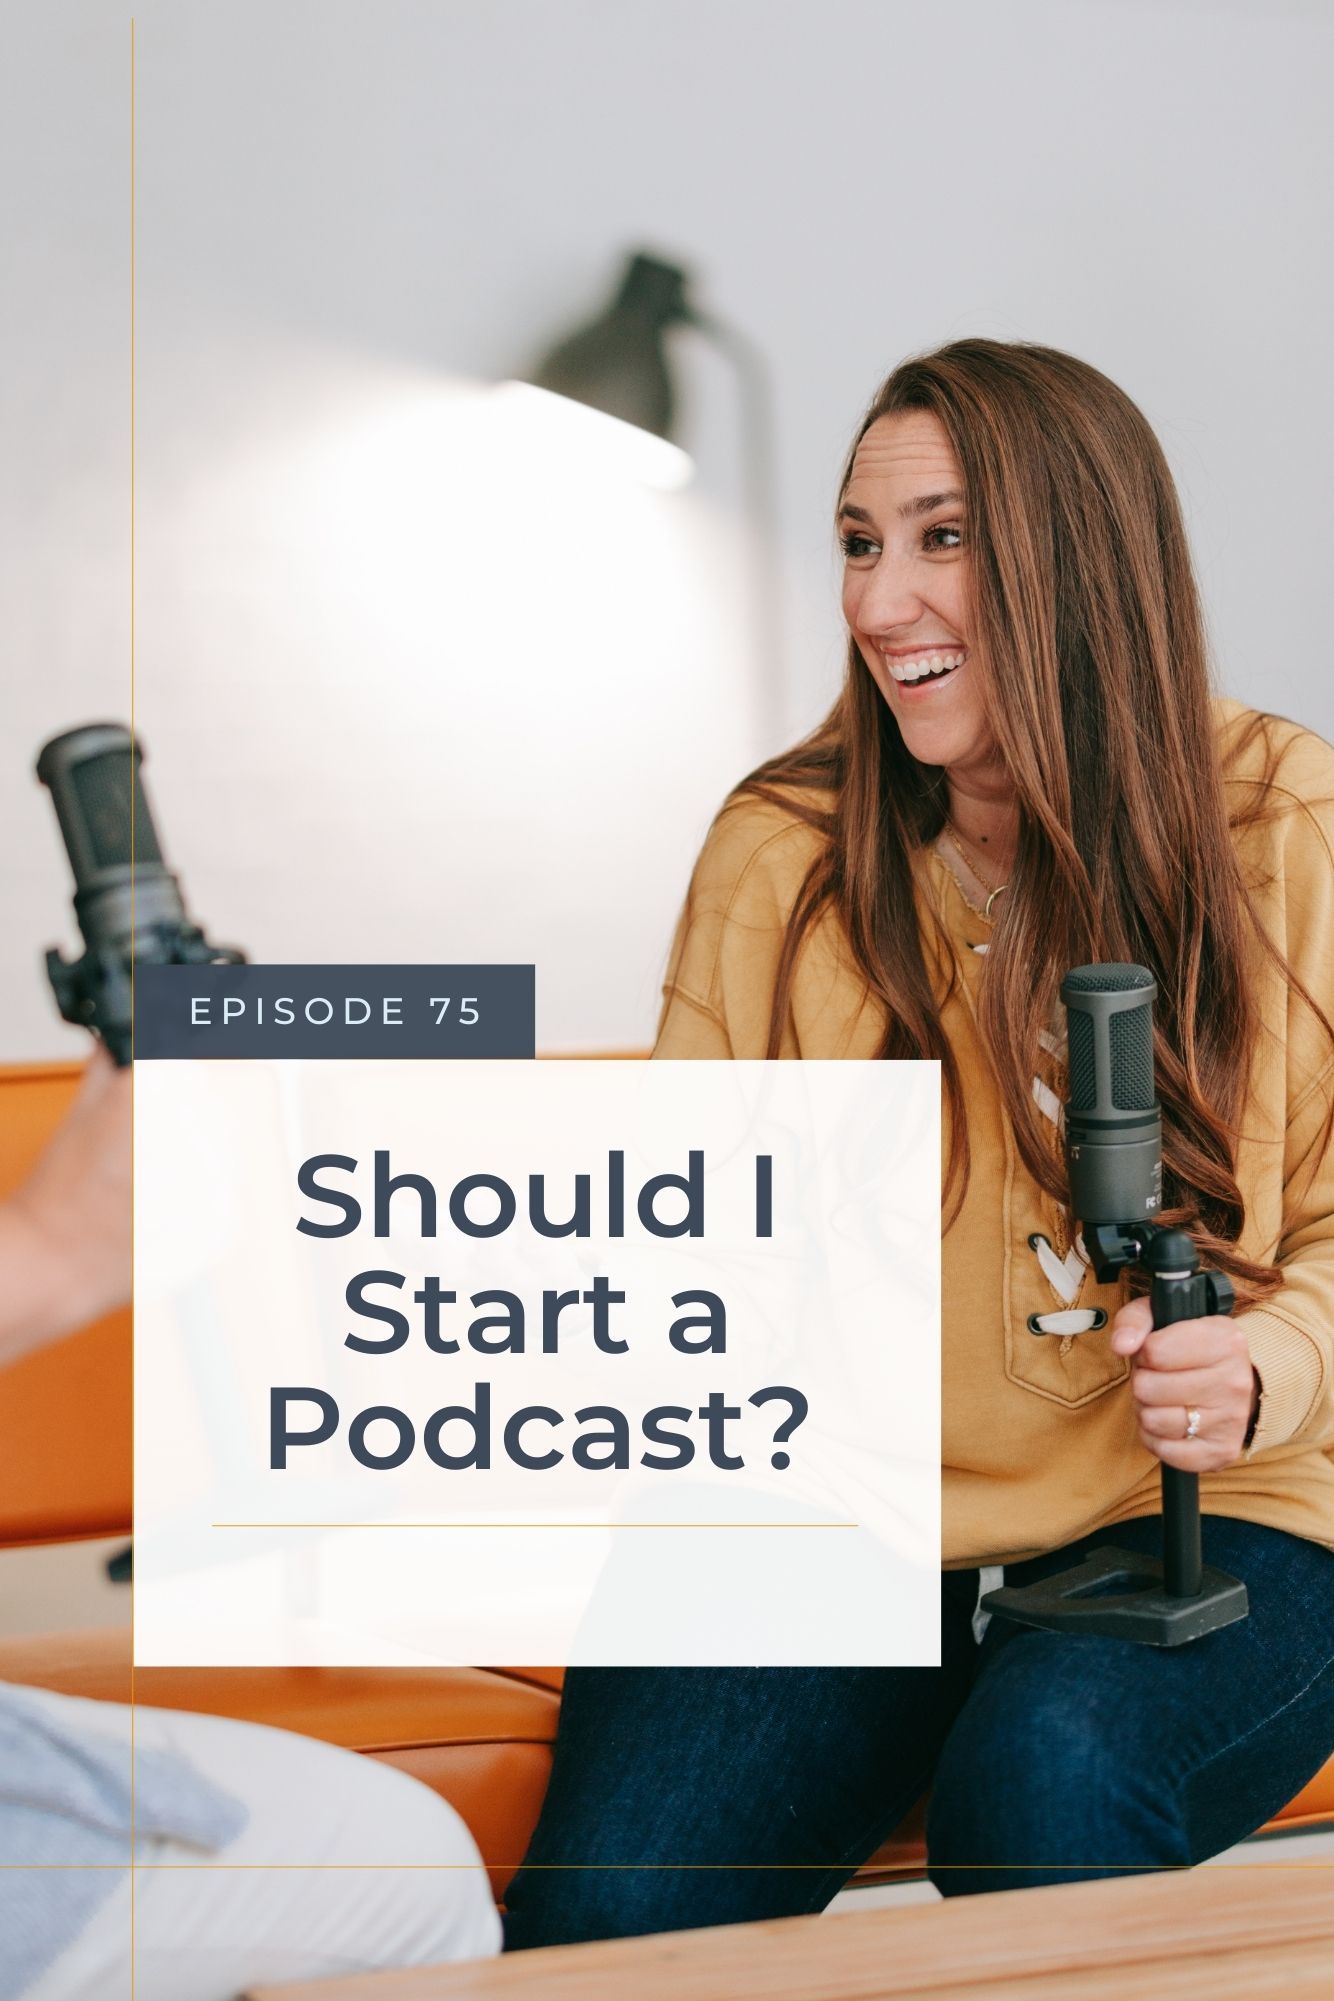 This podcast for Christian women business owners is all about the idea of "should I start a podcast" and has a graphic of a dark haired woman holding a podcasting mic and talking to another Christian business owner.